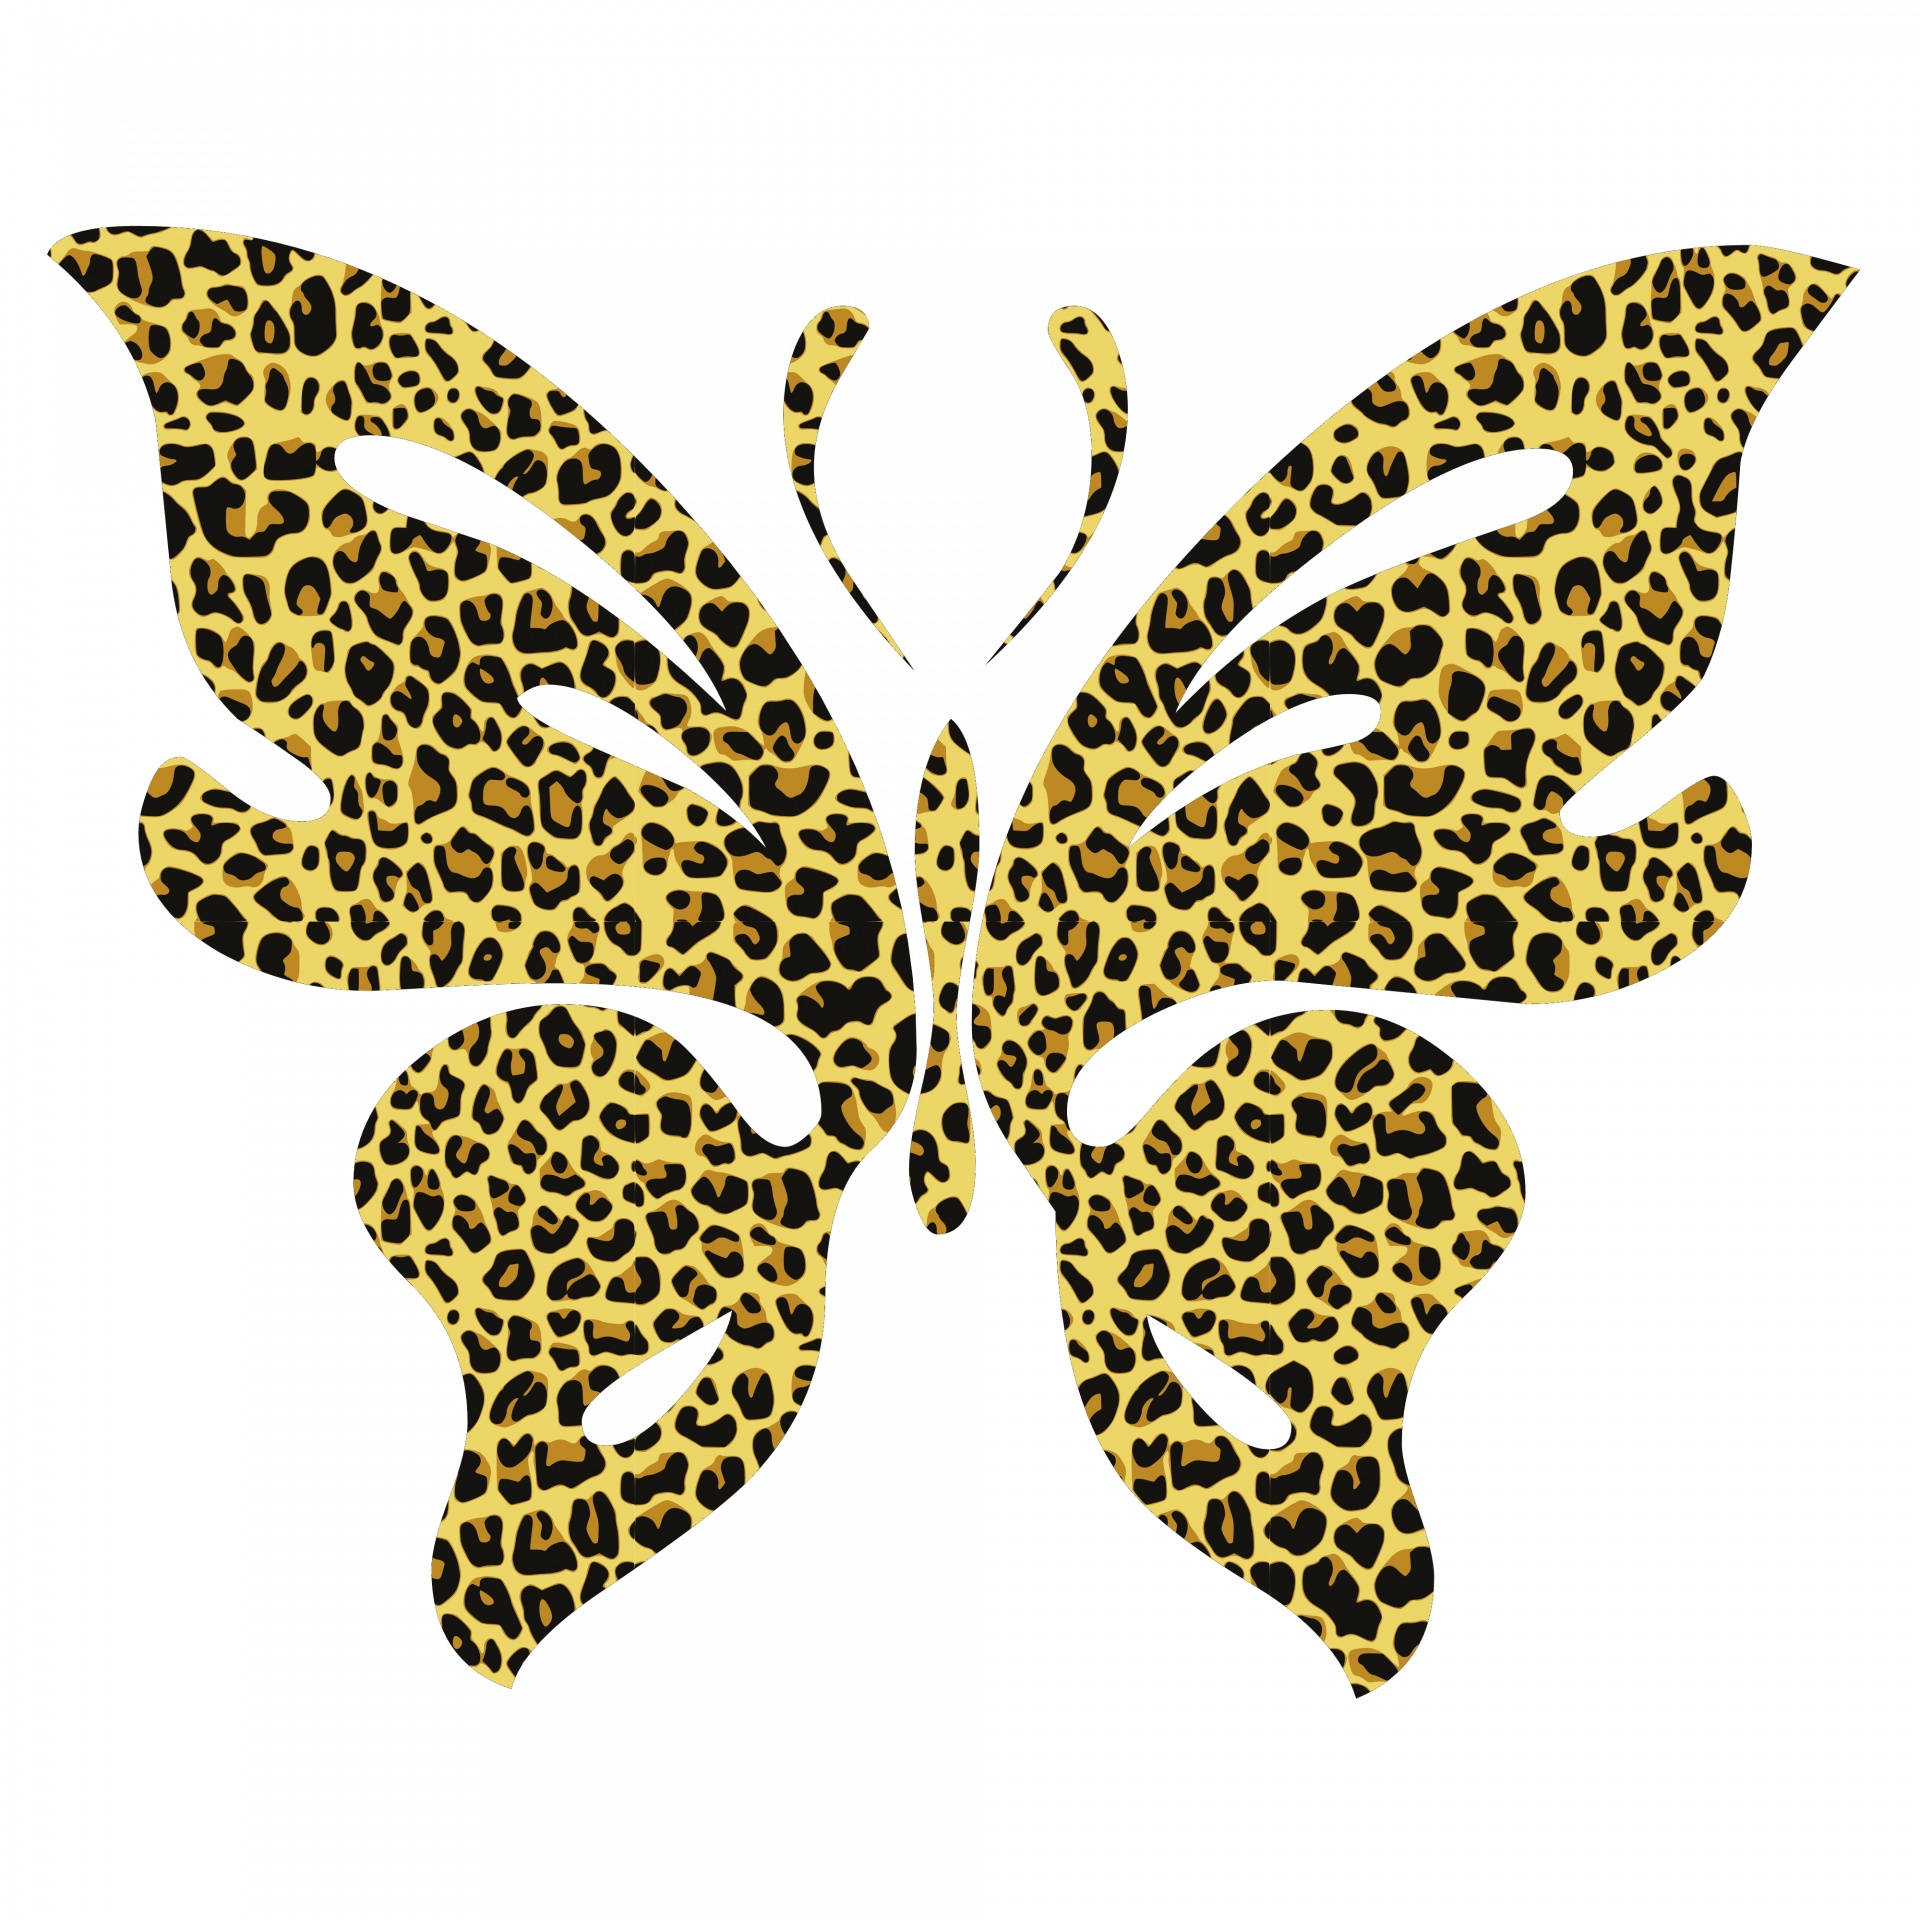 butterfly drawing jaguar free photo